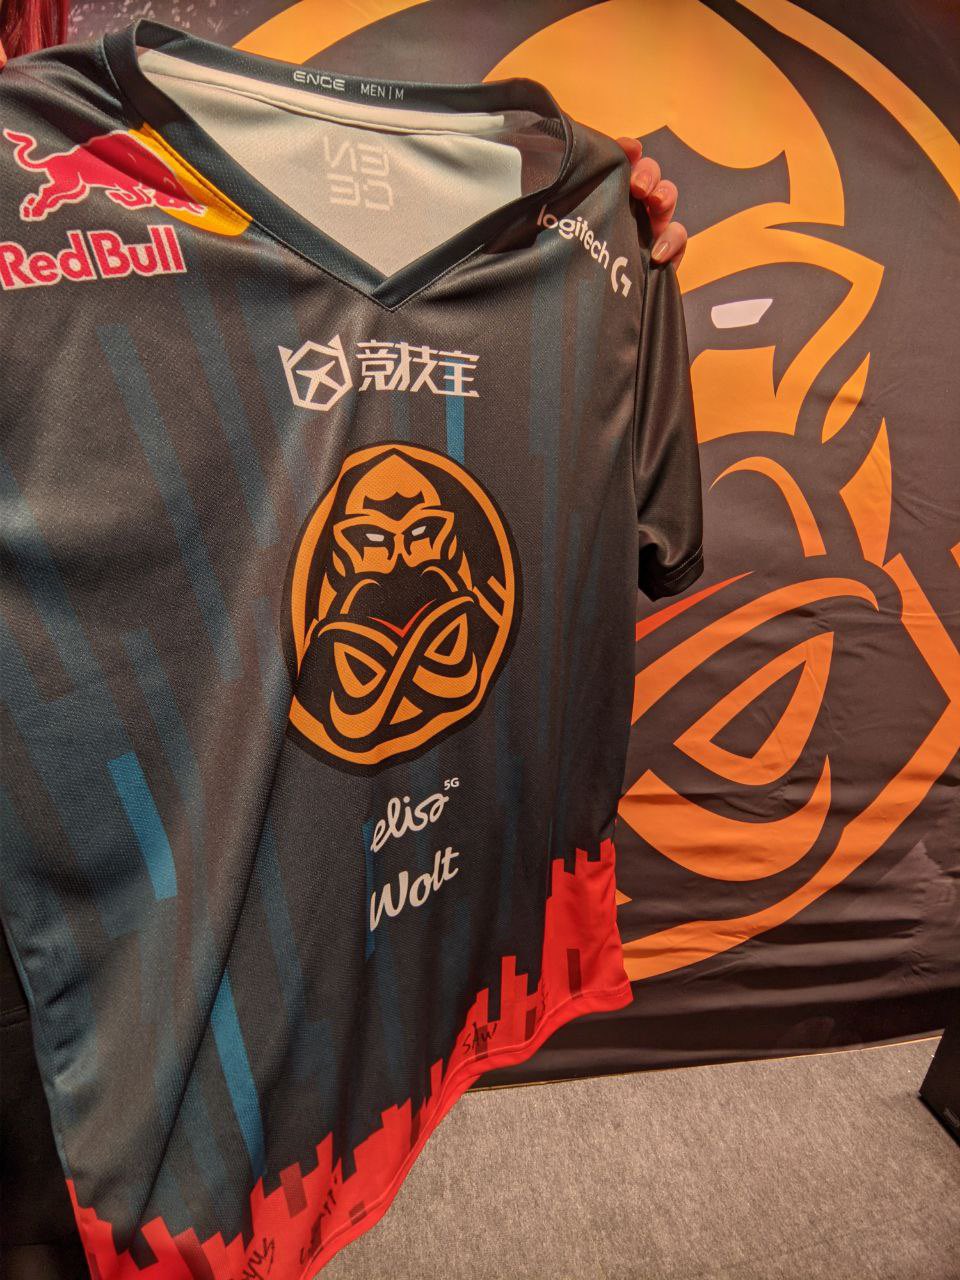 Elisa Esports on X: "We have hidden one @ENCE jersey with main rosters'  signatures… Hint: It's in grey ENCE bag in a visible place… GO GRAB IT🔥  #ElisaMasters https://t.co/HXkoNvLY8Q" / X